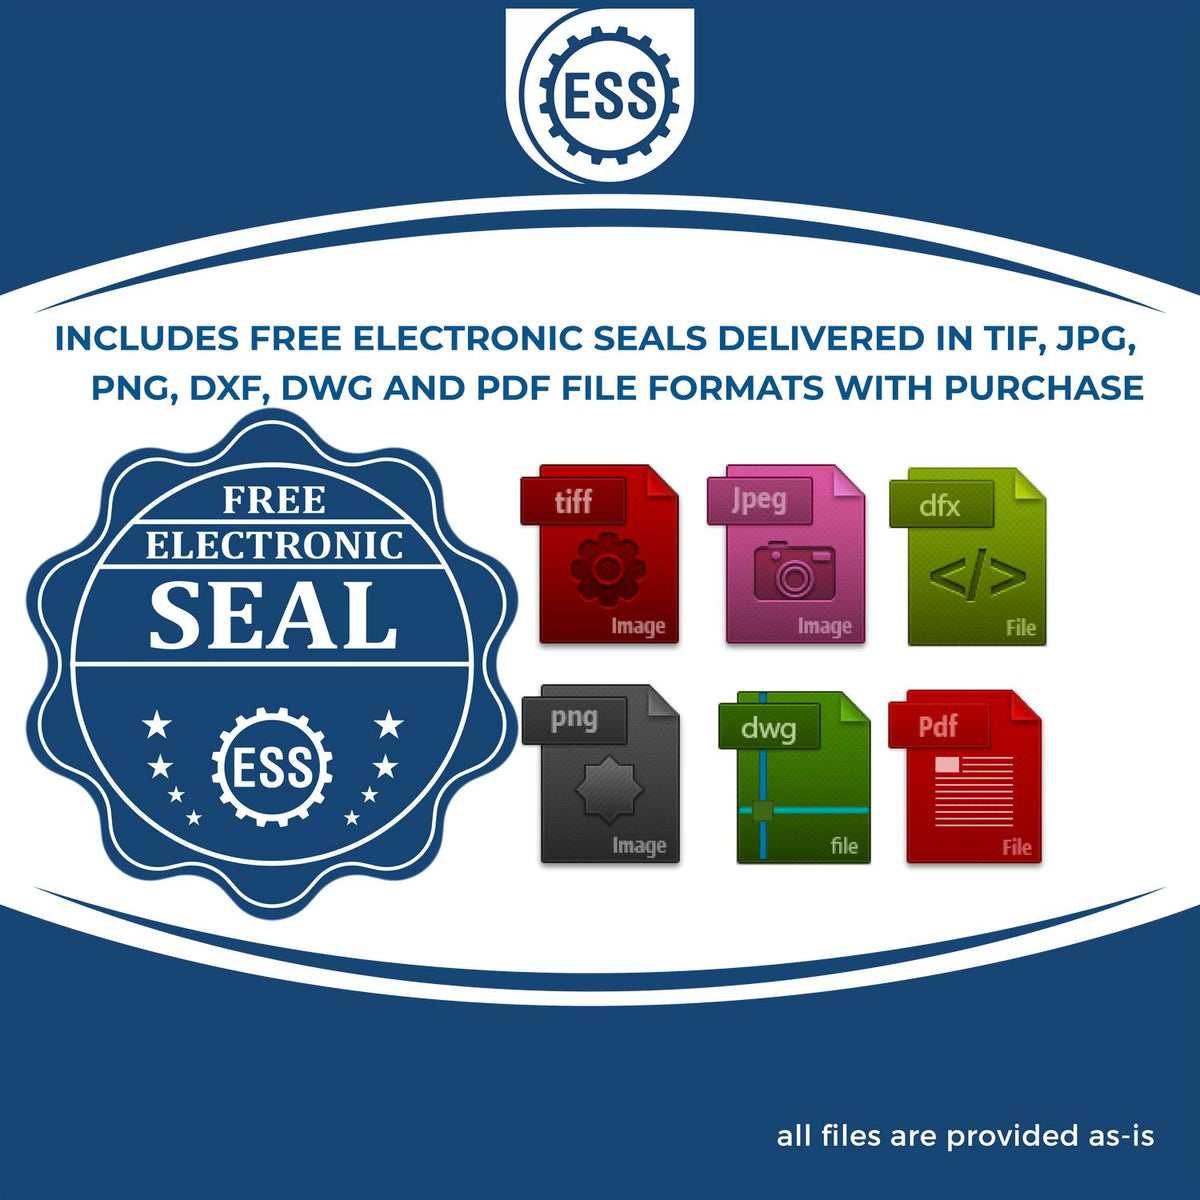 An infographic for the free electronic seal for the Self-Inking Hawaii Landscape Architect Stamp illustrating the different file type icons such as DXF, DWG, TIF, JPG and PNG.